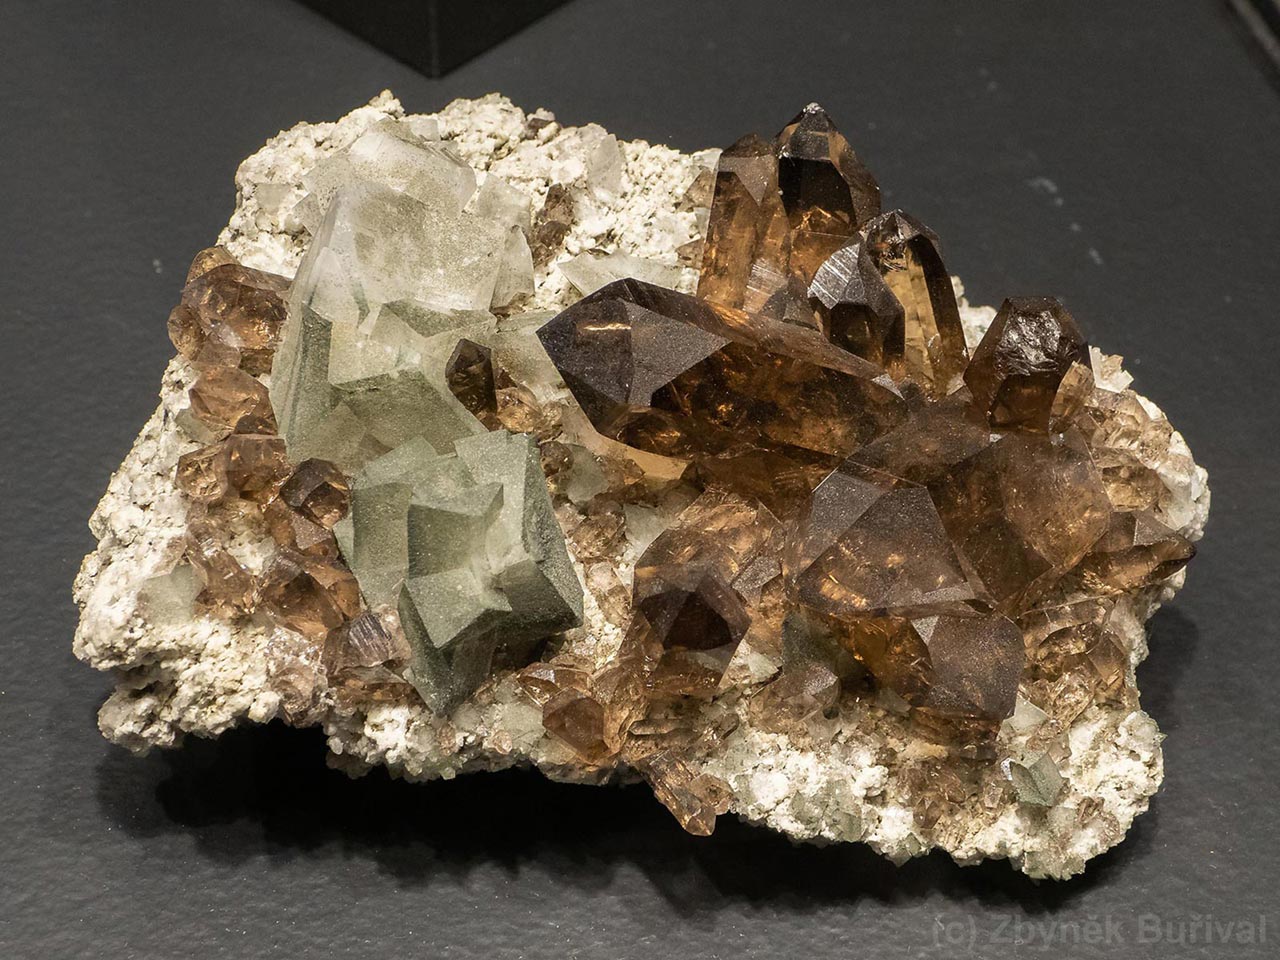 crystal cluster of gemmy smoky quartz with adularia from Galmihorn, Switzerland